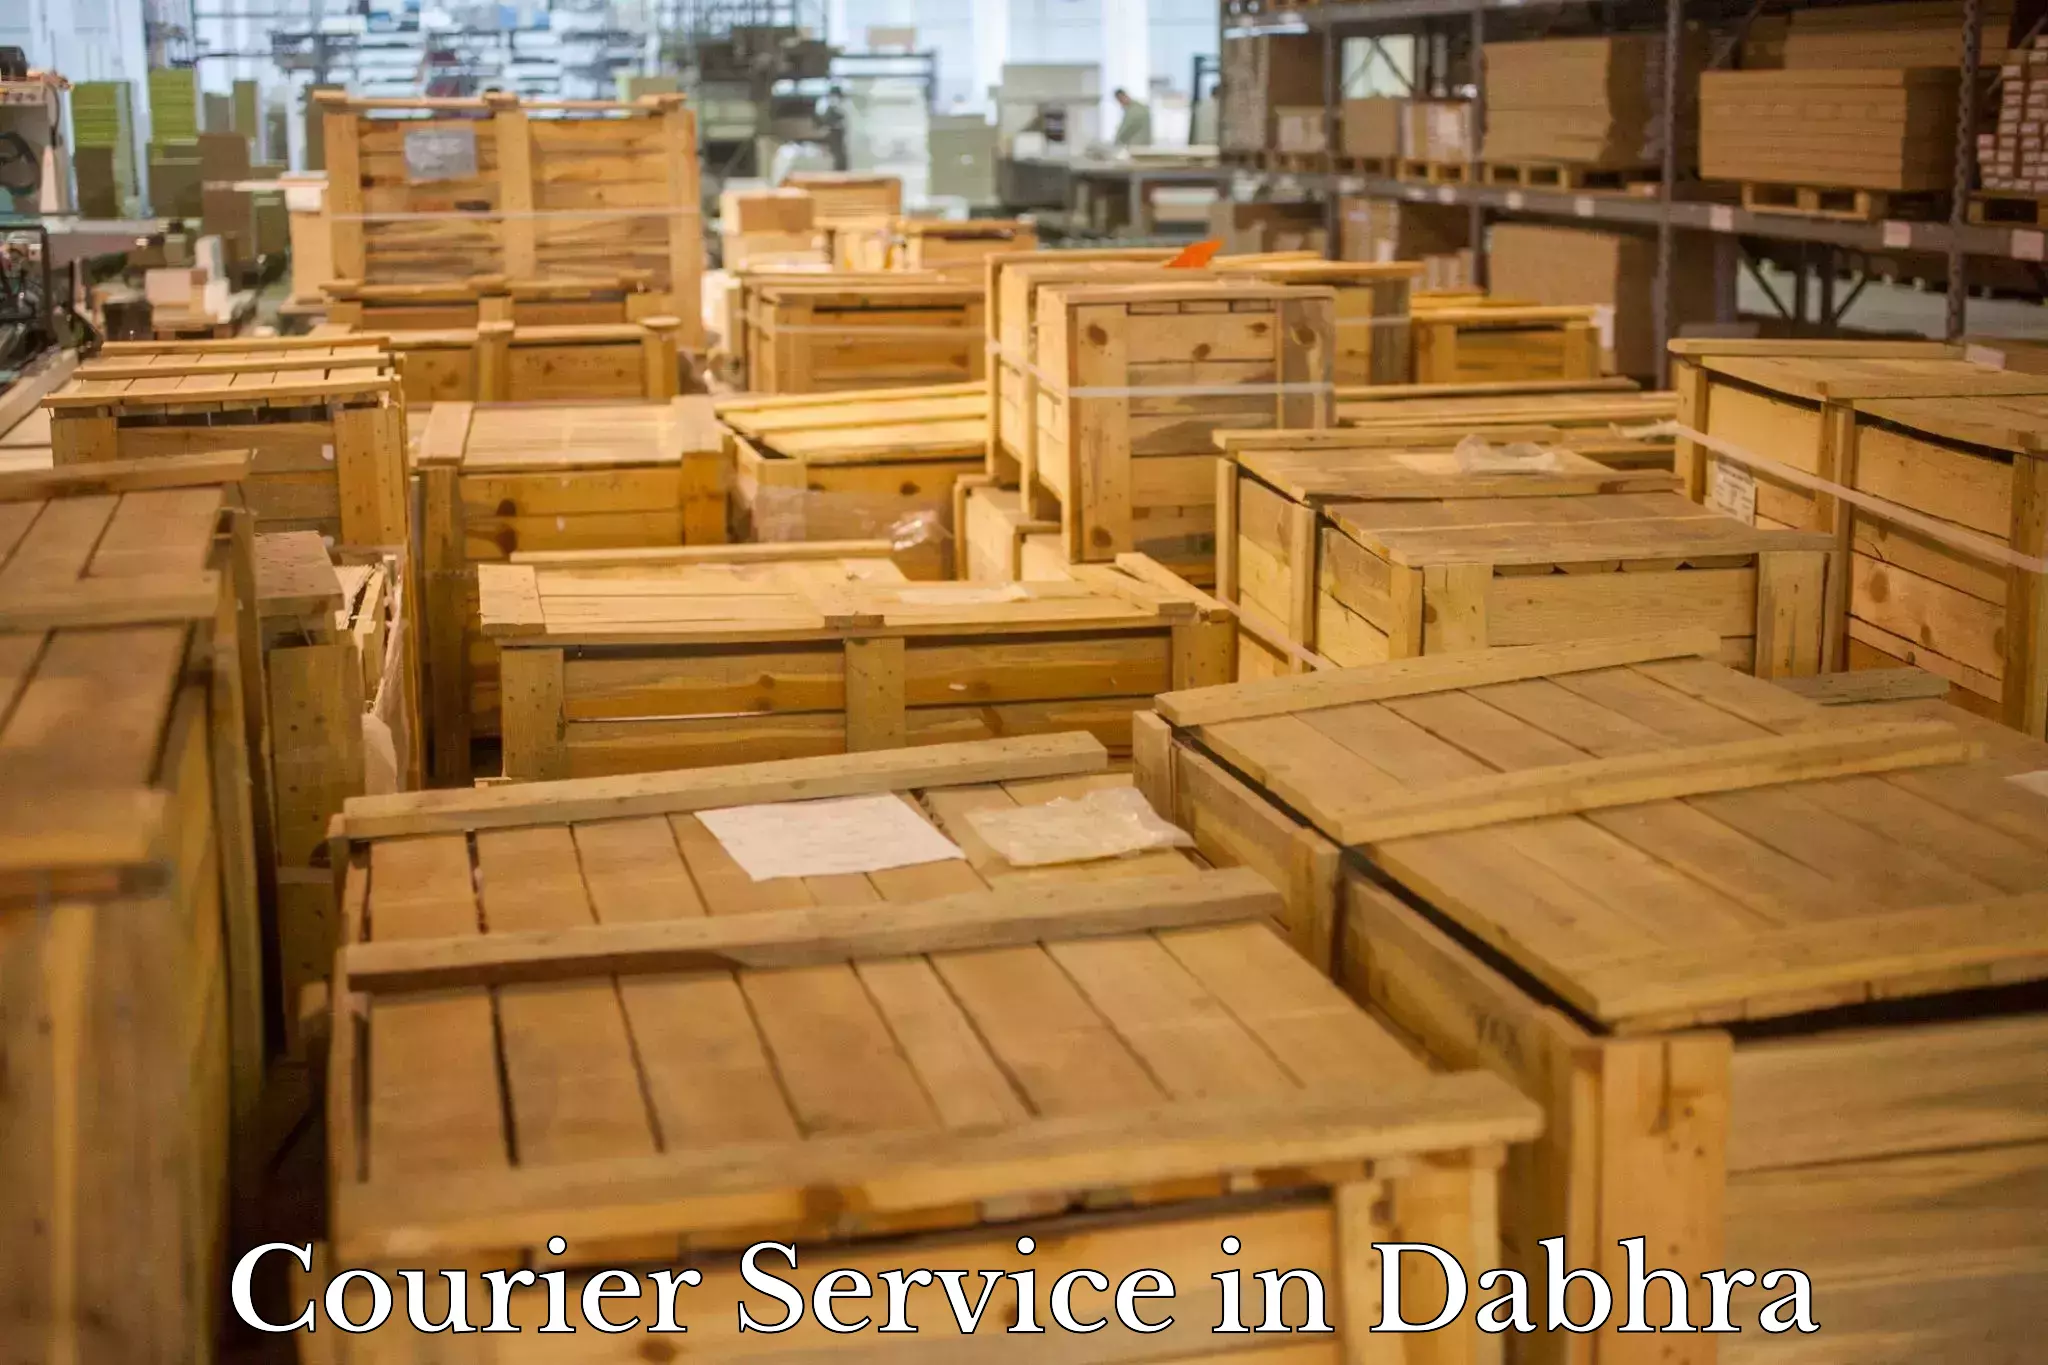 Custom courier packaging in Dabhra